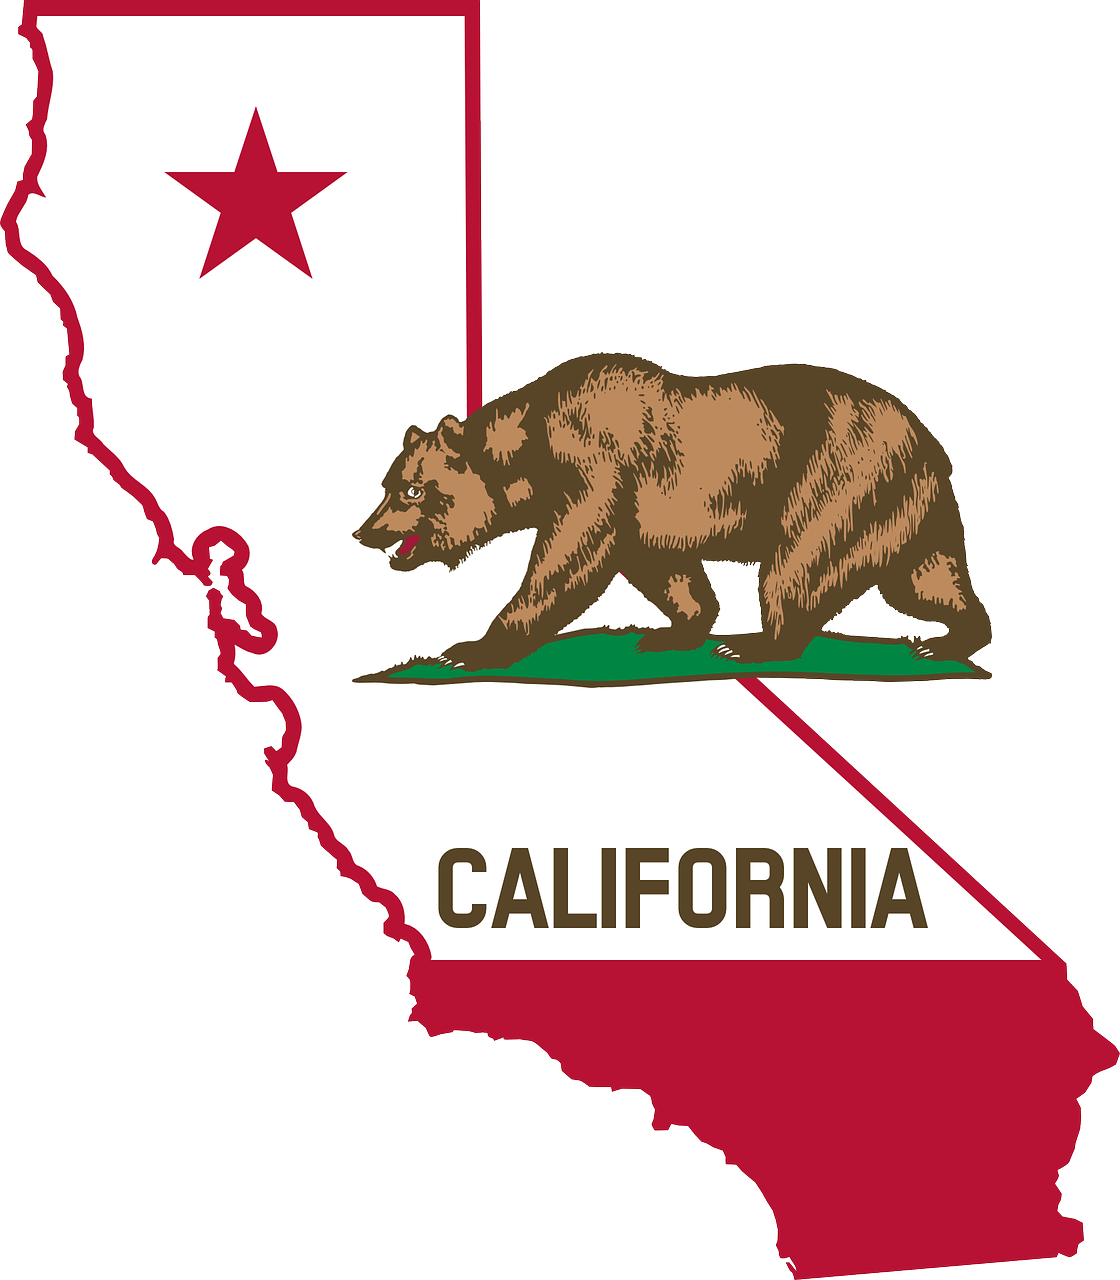 Red outline of California with state bear logo